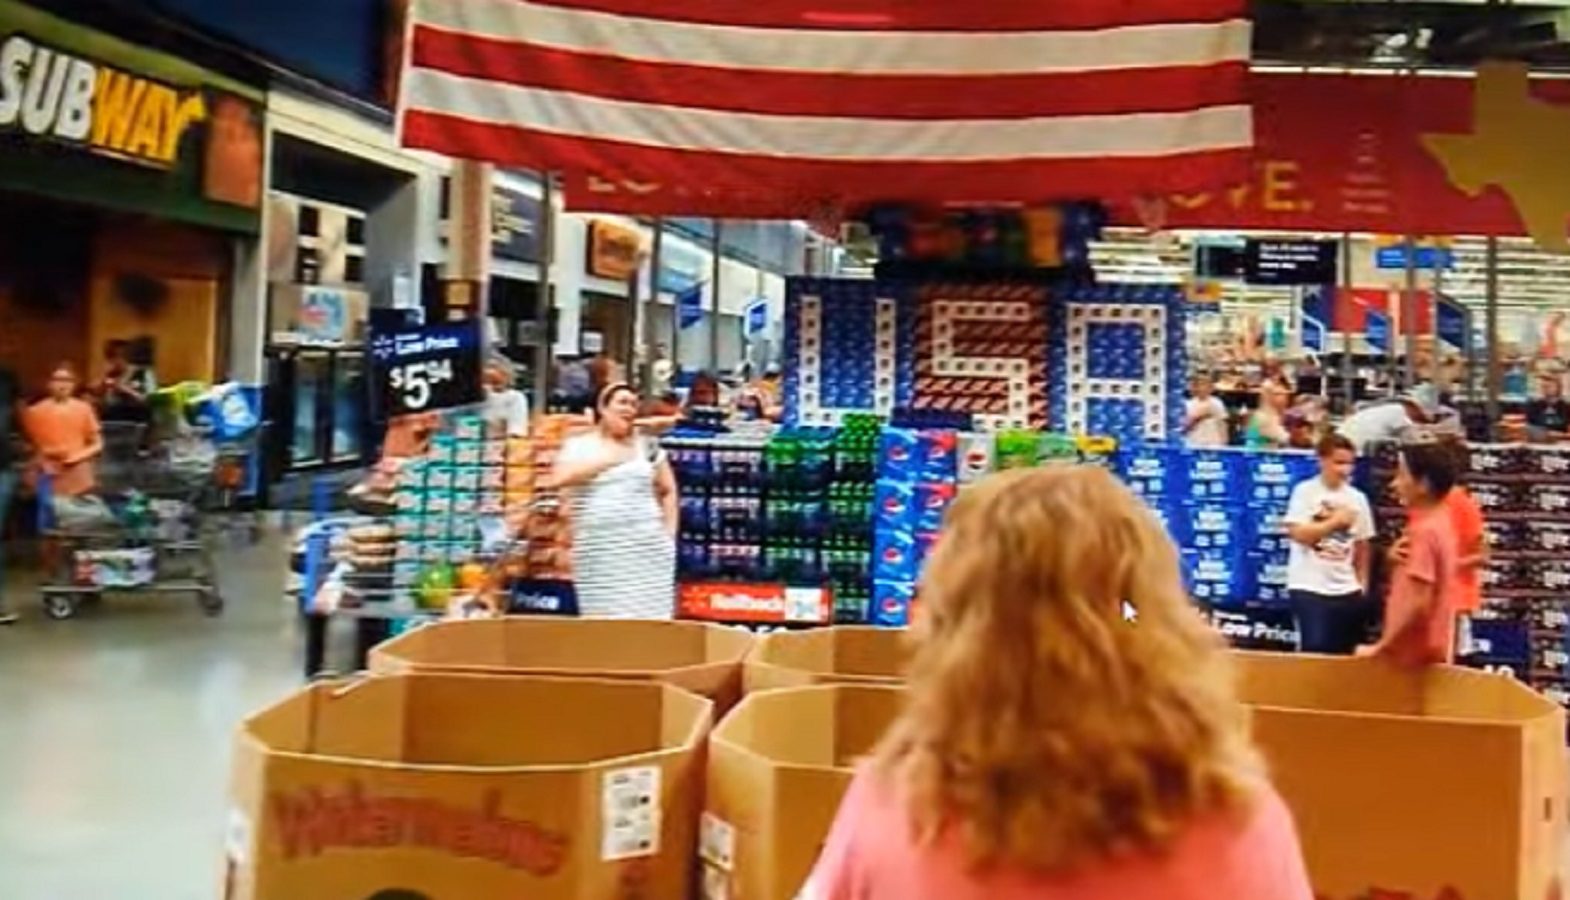 MUST WATCH: Walmart Shoppers in Texas Stop and Sing Beautiful Rendition of the National Anthem | The Gateway Pundit | by Cassandra MacDonald